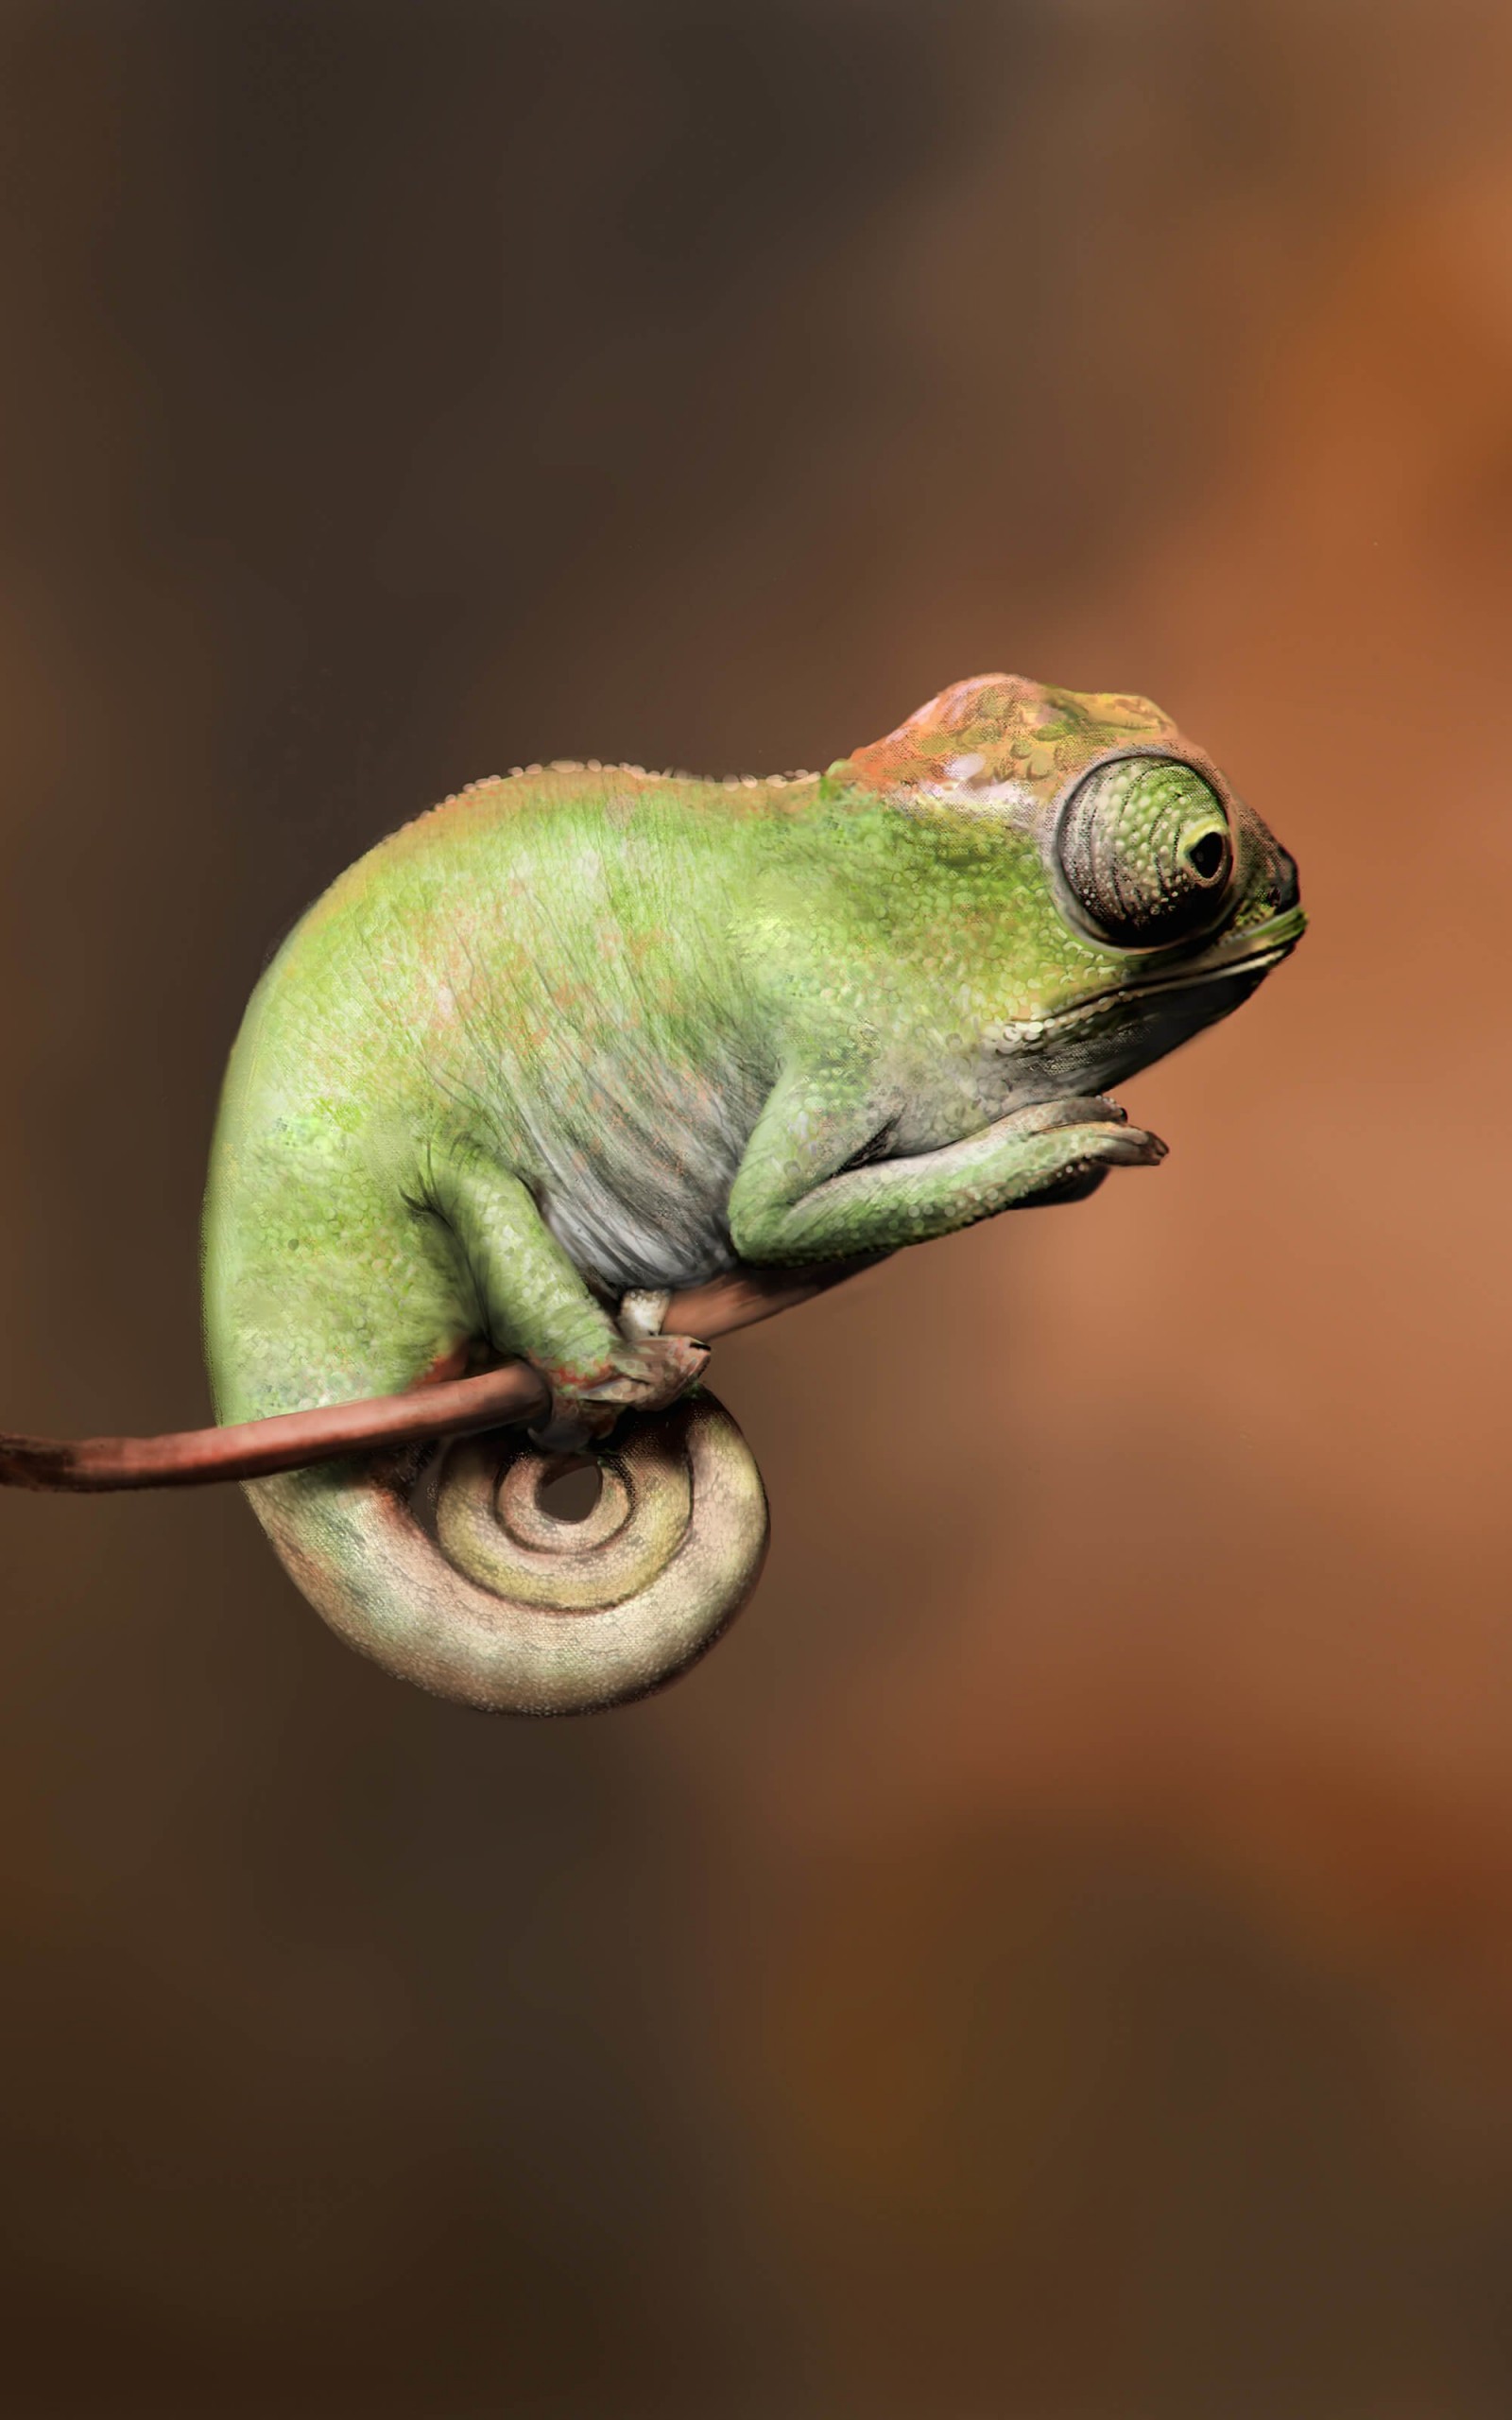 Baby Chameleon Perching On a Twisted Branch Wallpaper for Amazon Kindle Fire HDX 8.9